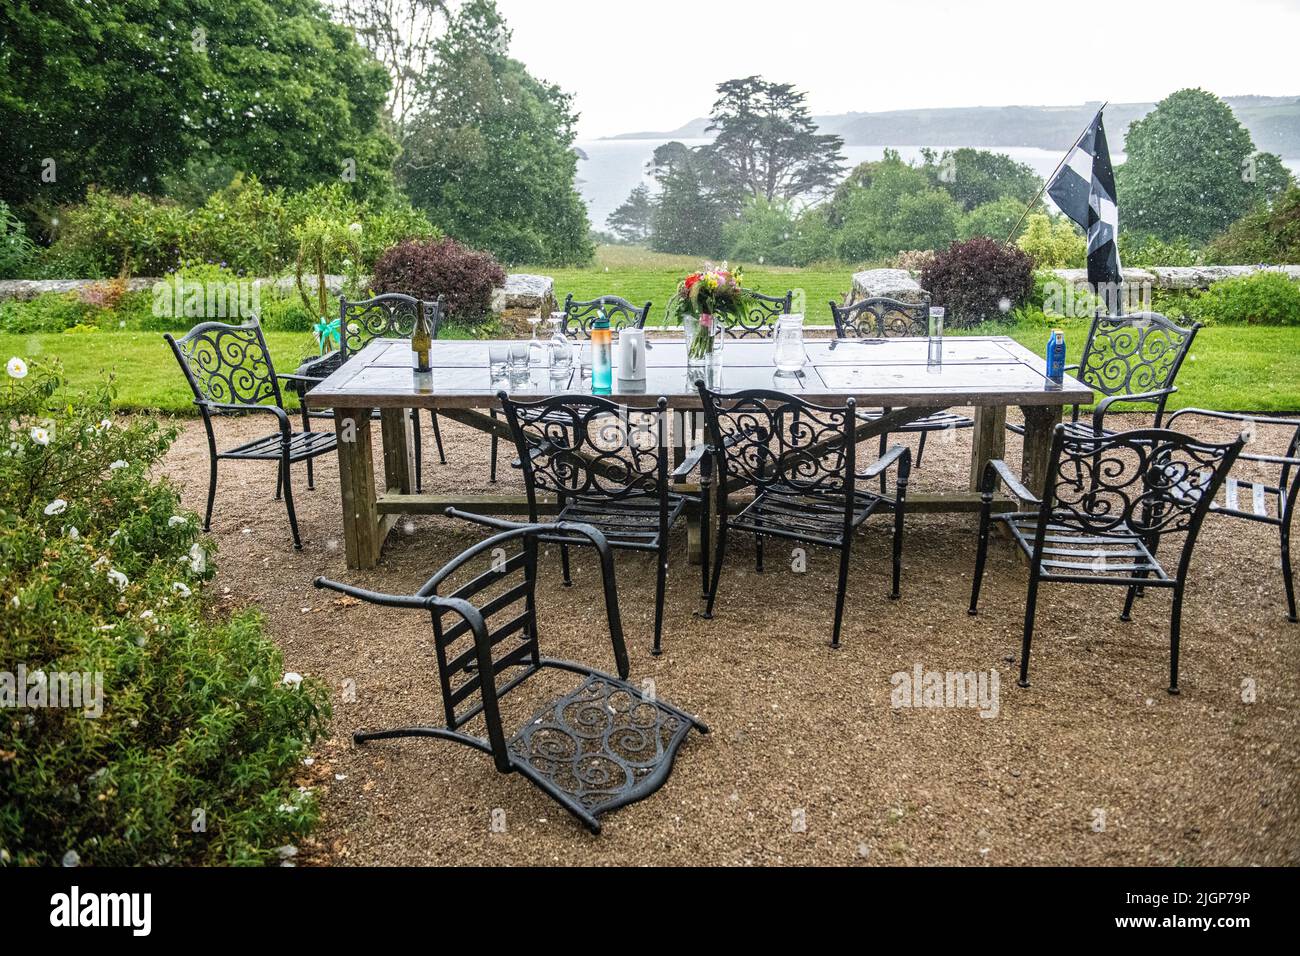 An abandoned picnic because of heavy rain in the west country Stock Photo